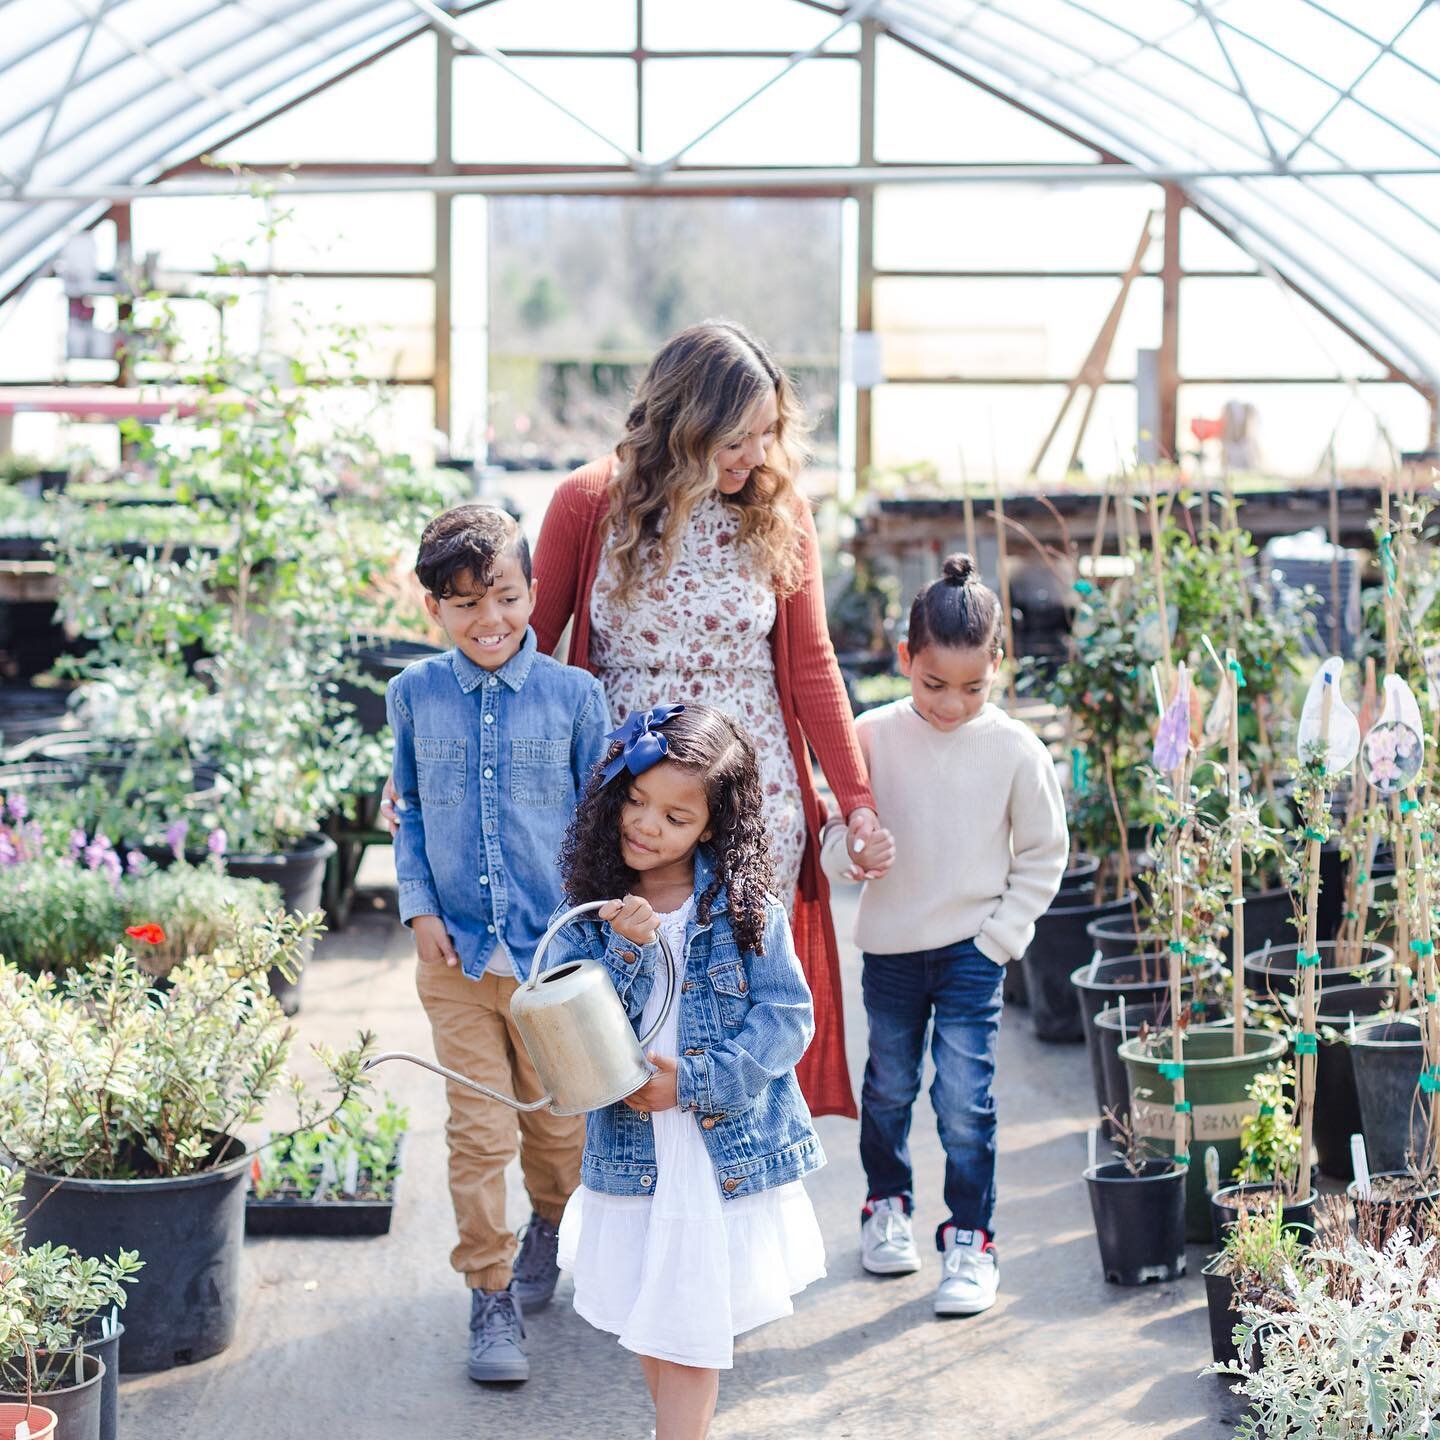 Even when your motherhood role changes over time, your love for your kids continues to grow.
-
When I did this mommy &amp; me spring session last year w/ @jenbumpus and her 3 beautiful kids, I had expressed to her how fast my little guy was growing u